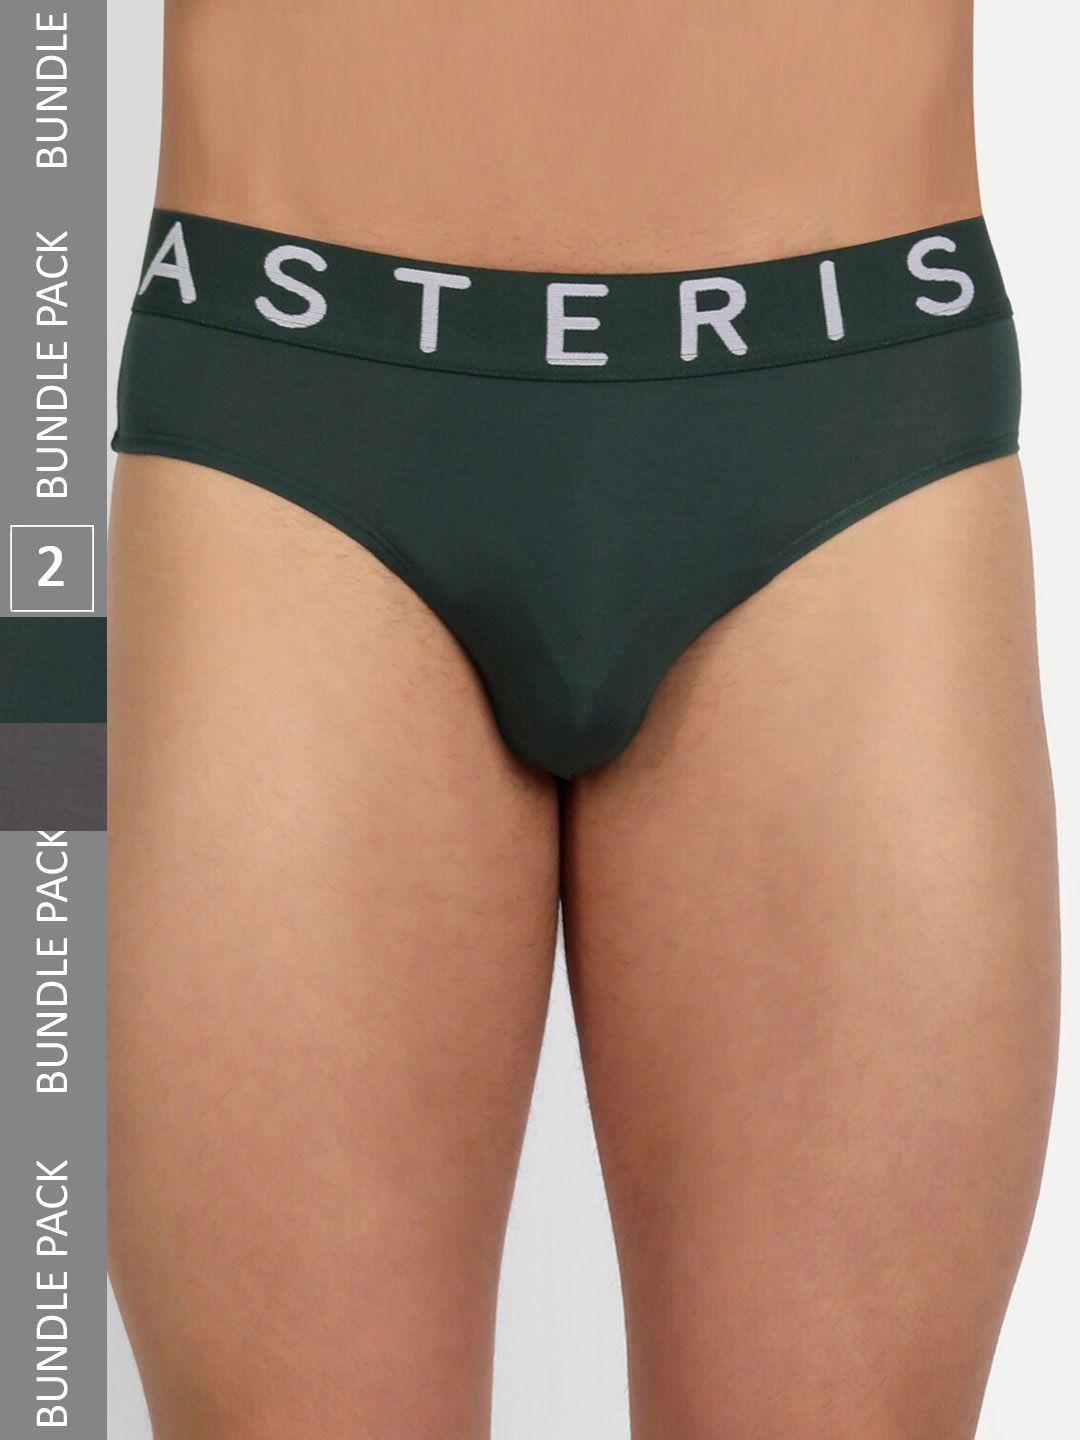 asterisk men pack of 2 ultrasoft micro modal briefs with snug fit mbr-mgy&fgn-xs-04